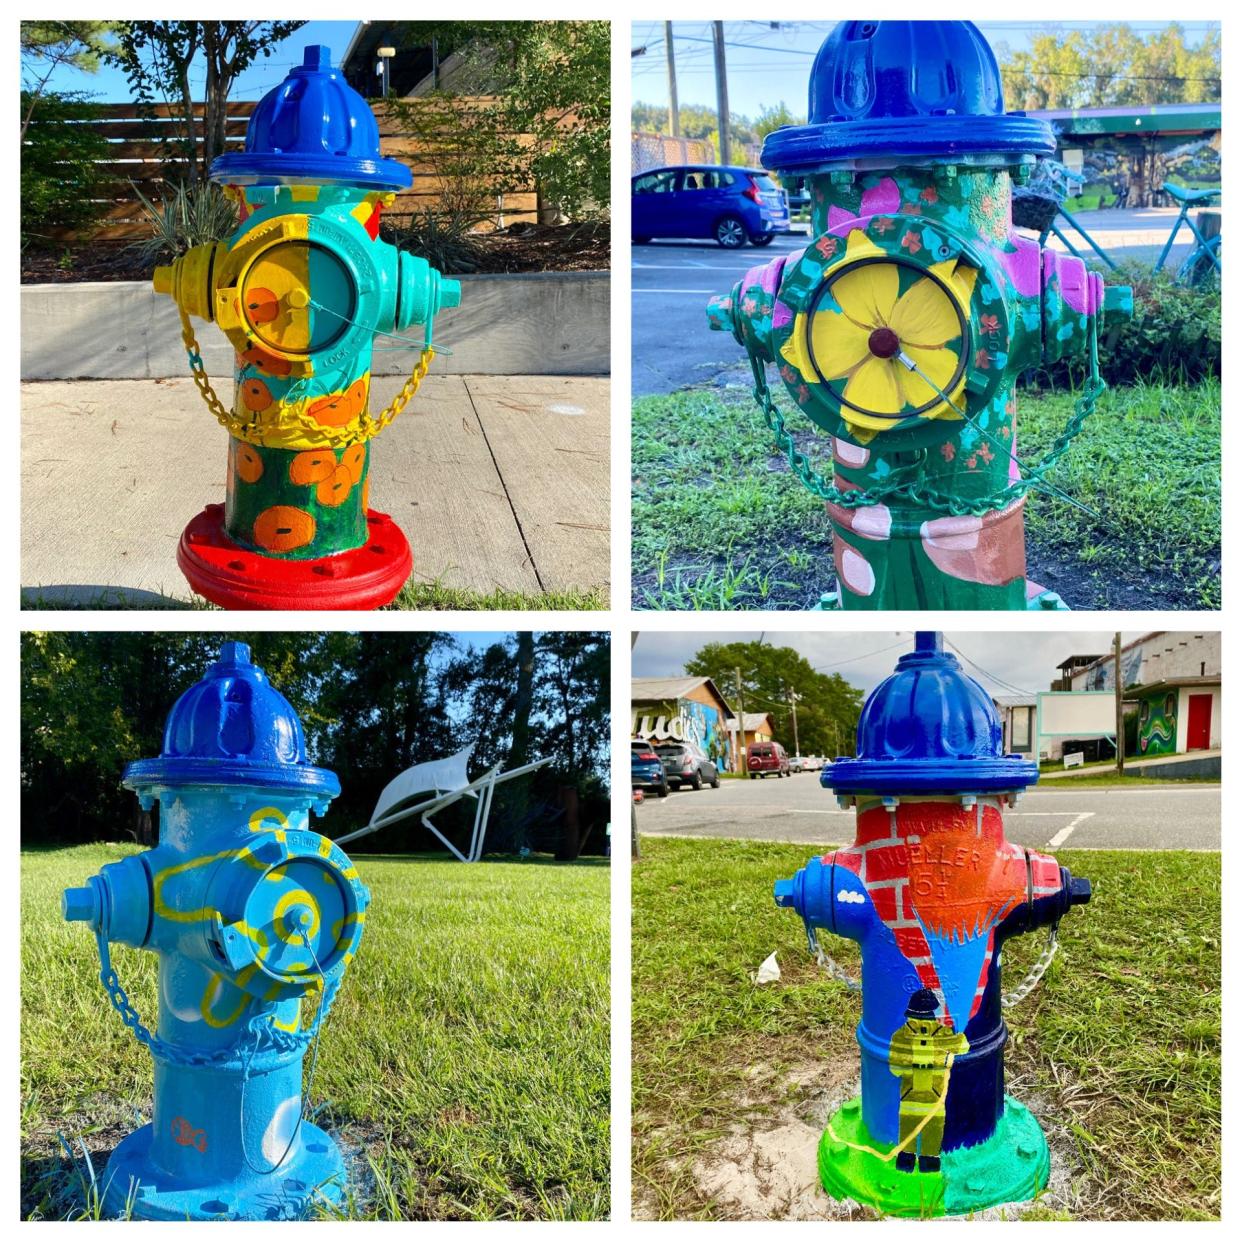 With "Art on Fire," local artists were given fire hydrants as an open canvas to showcase their abilities.